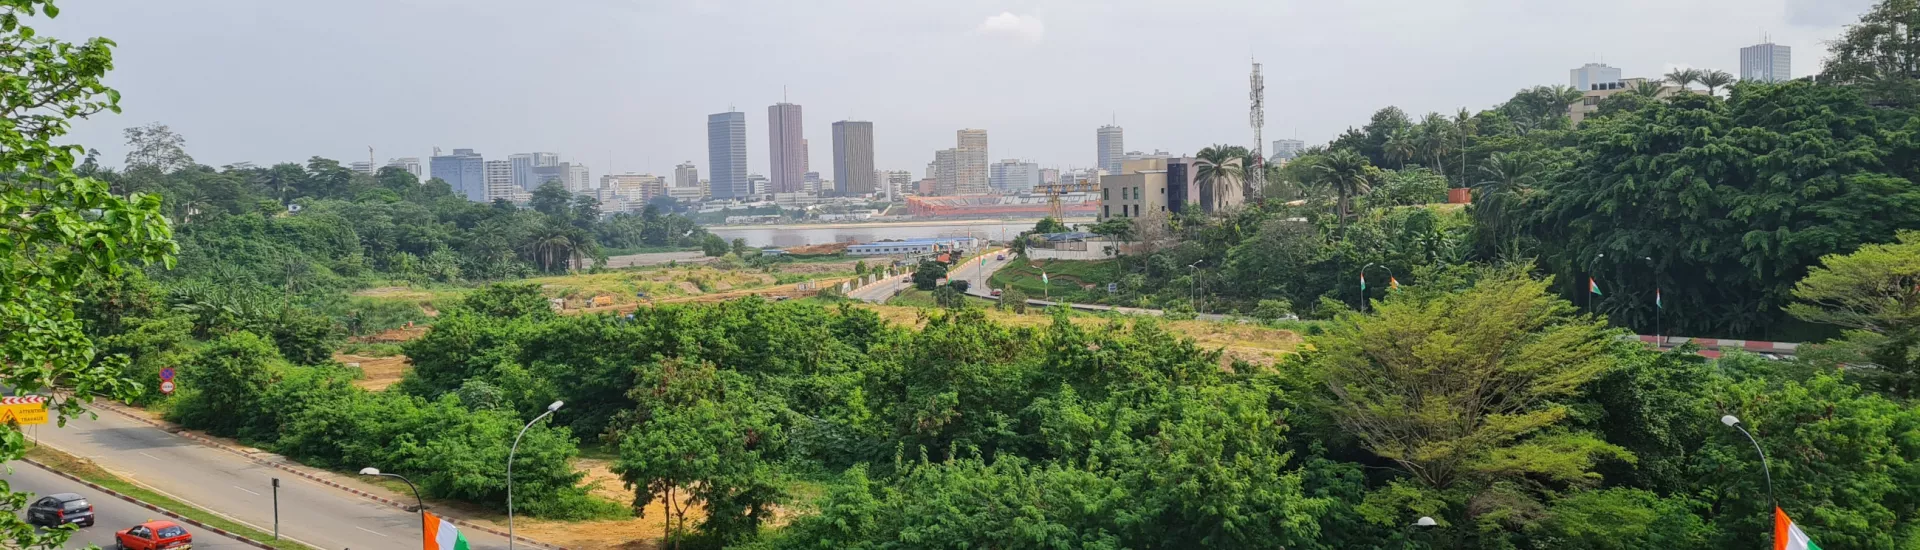 Panoramic view of Côte d'Ivoire